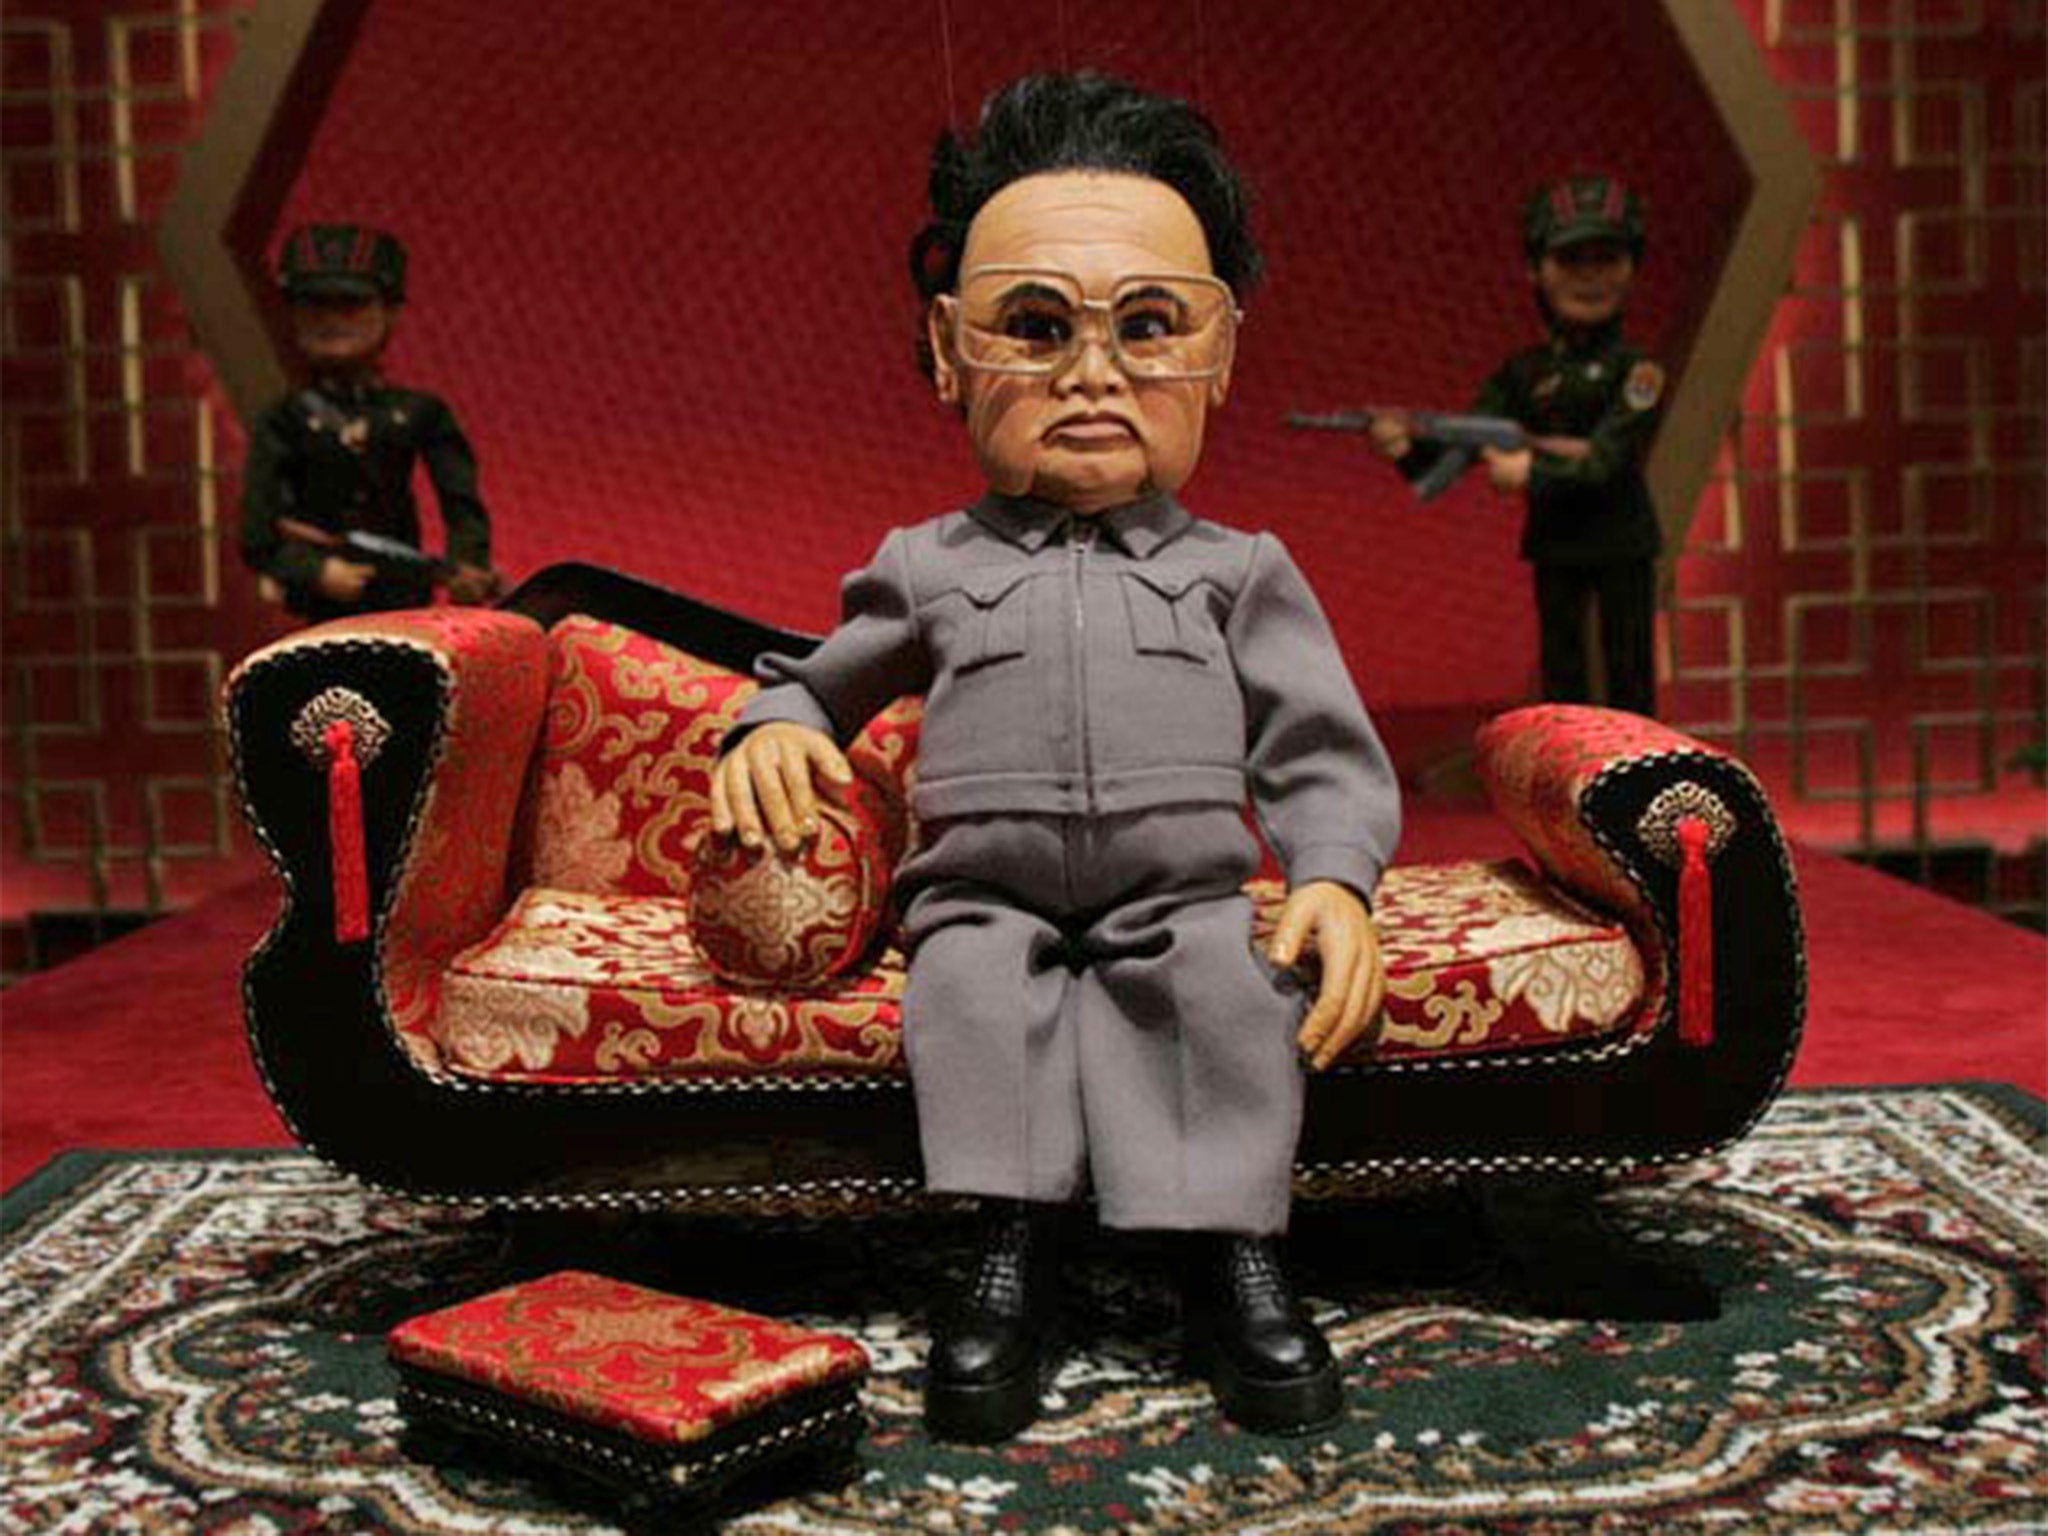 A scene from 'Team America: World Police' the 2004 puppet satire that lampooned Kim Jong-il, father of North Korea’s current leader